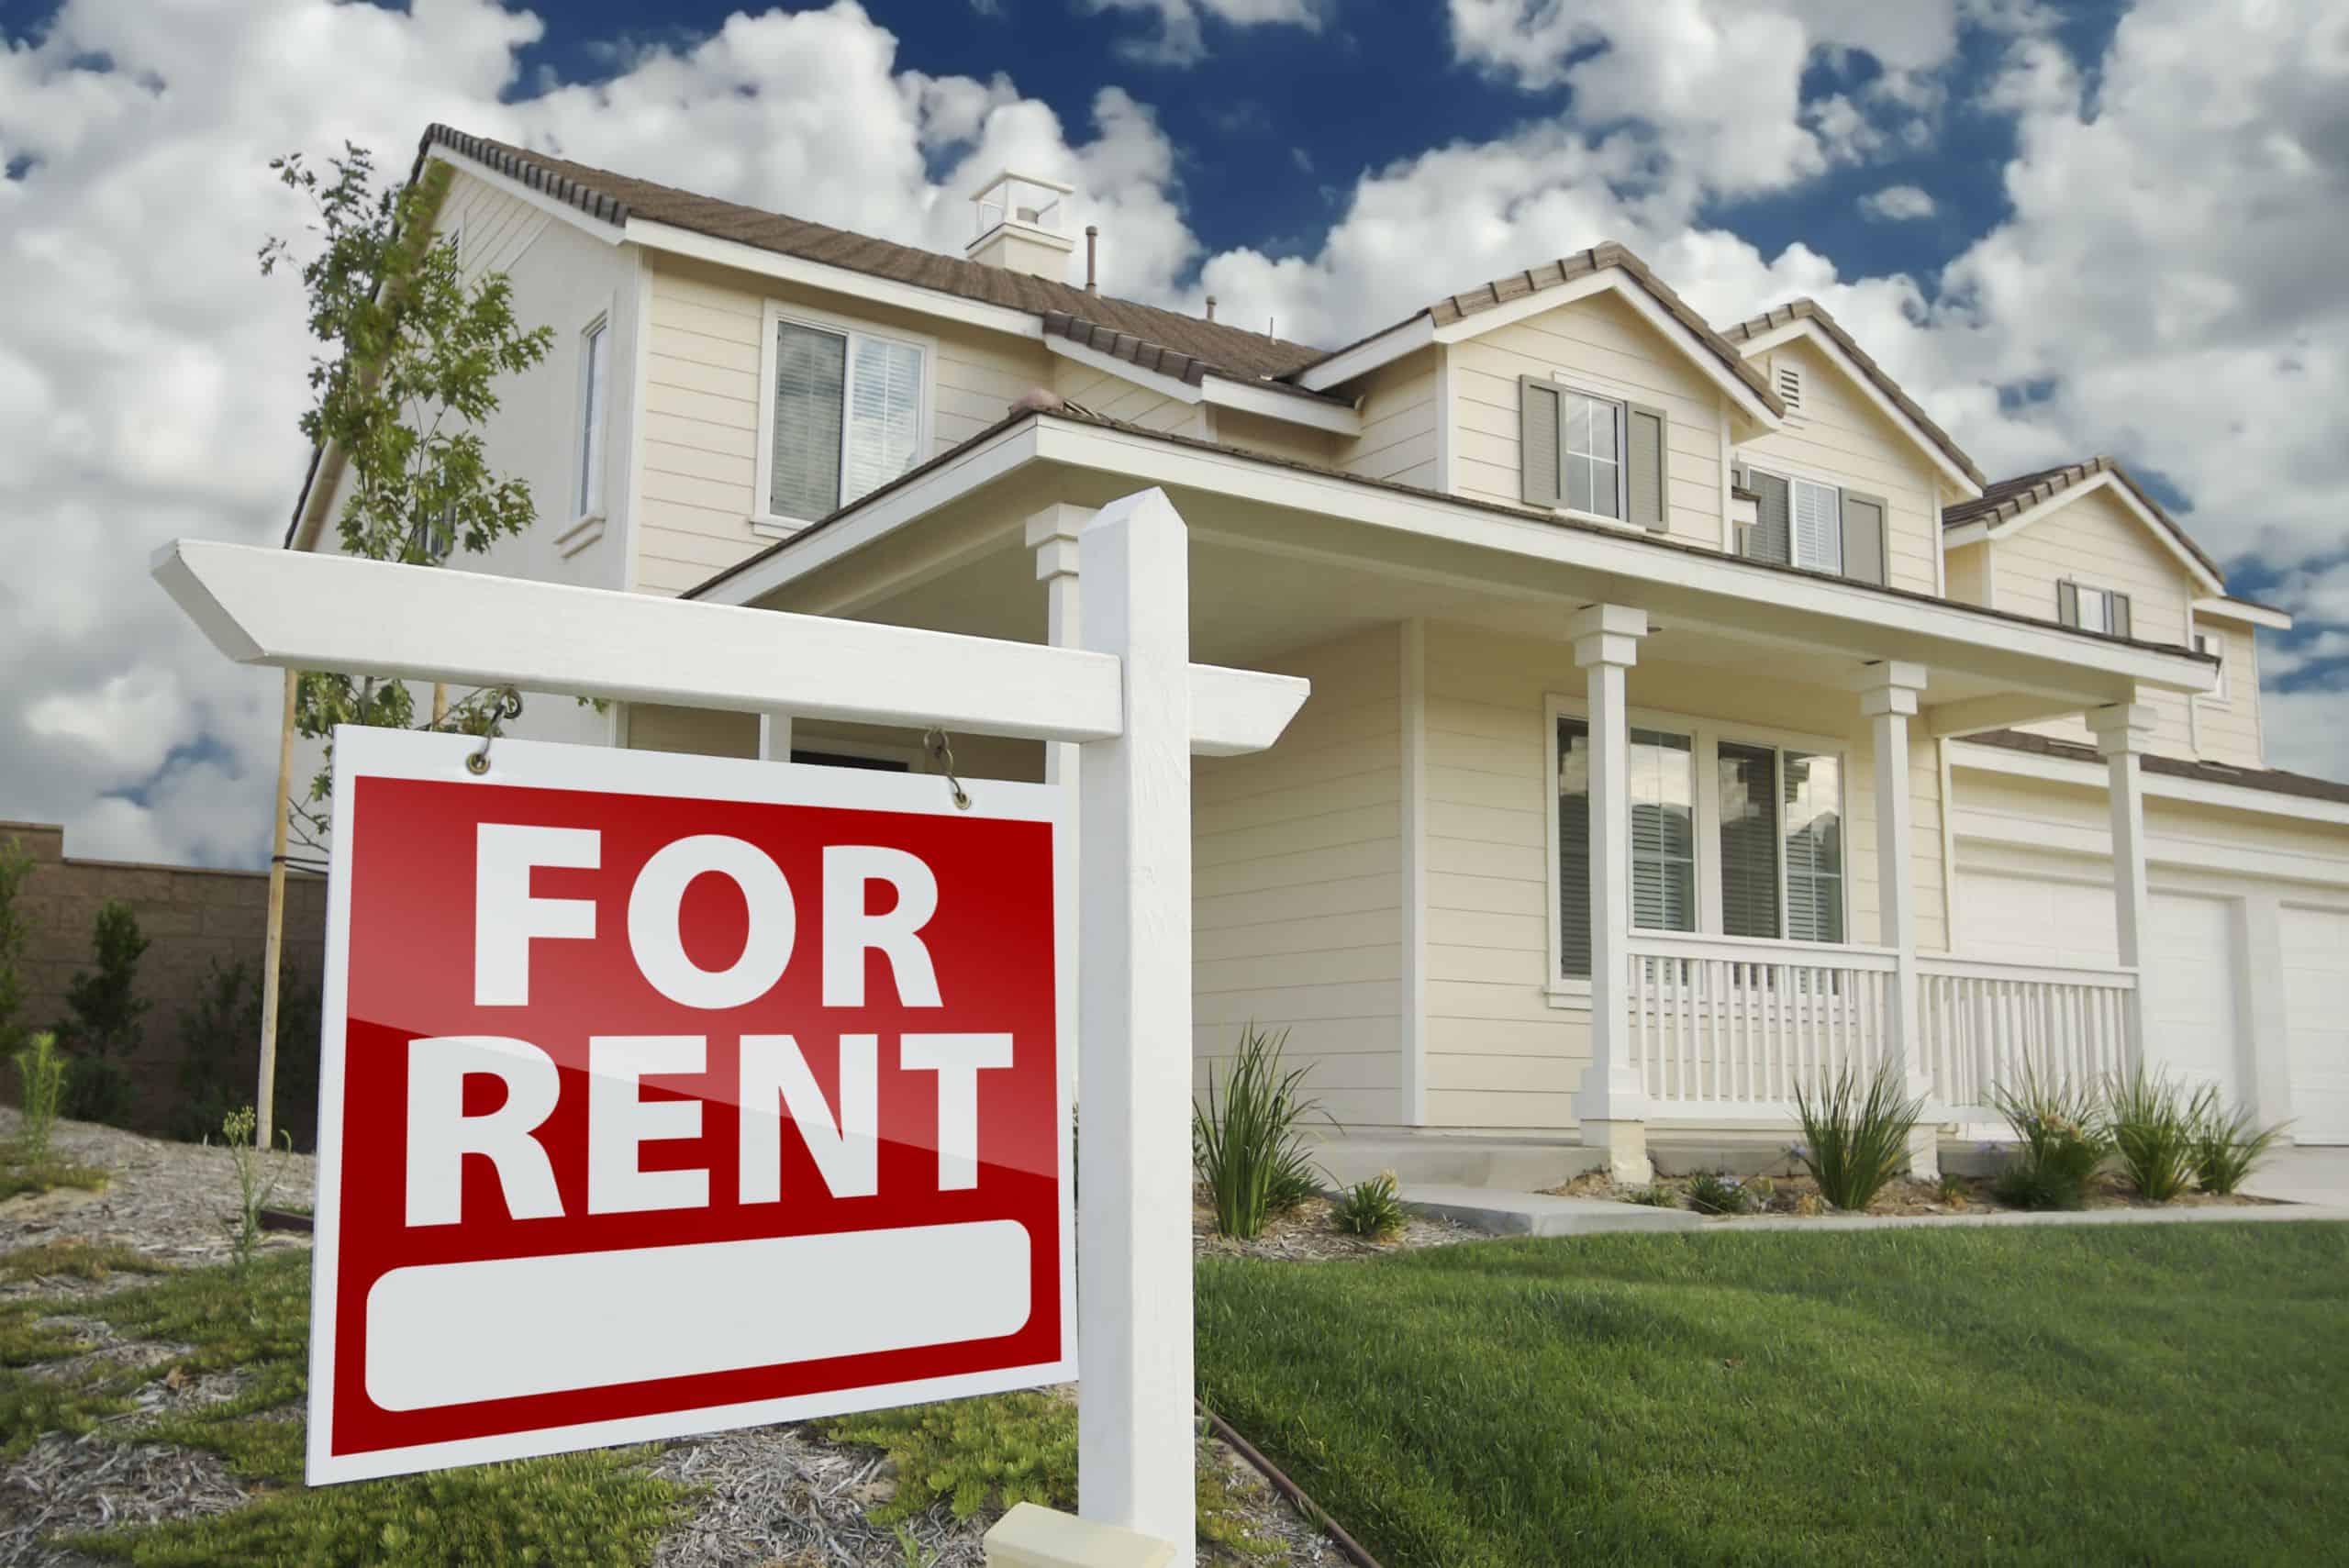 Renting vs. Buying a Home in Your Retirement